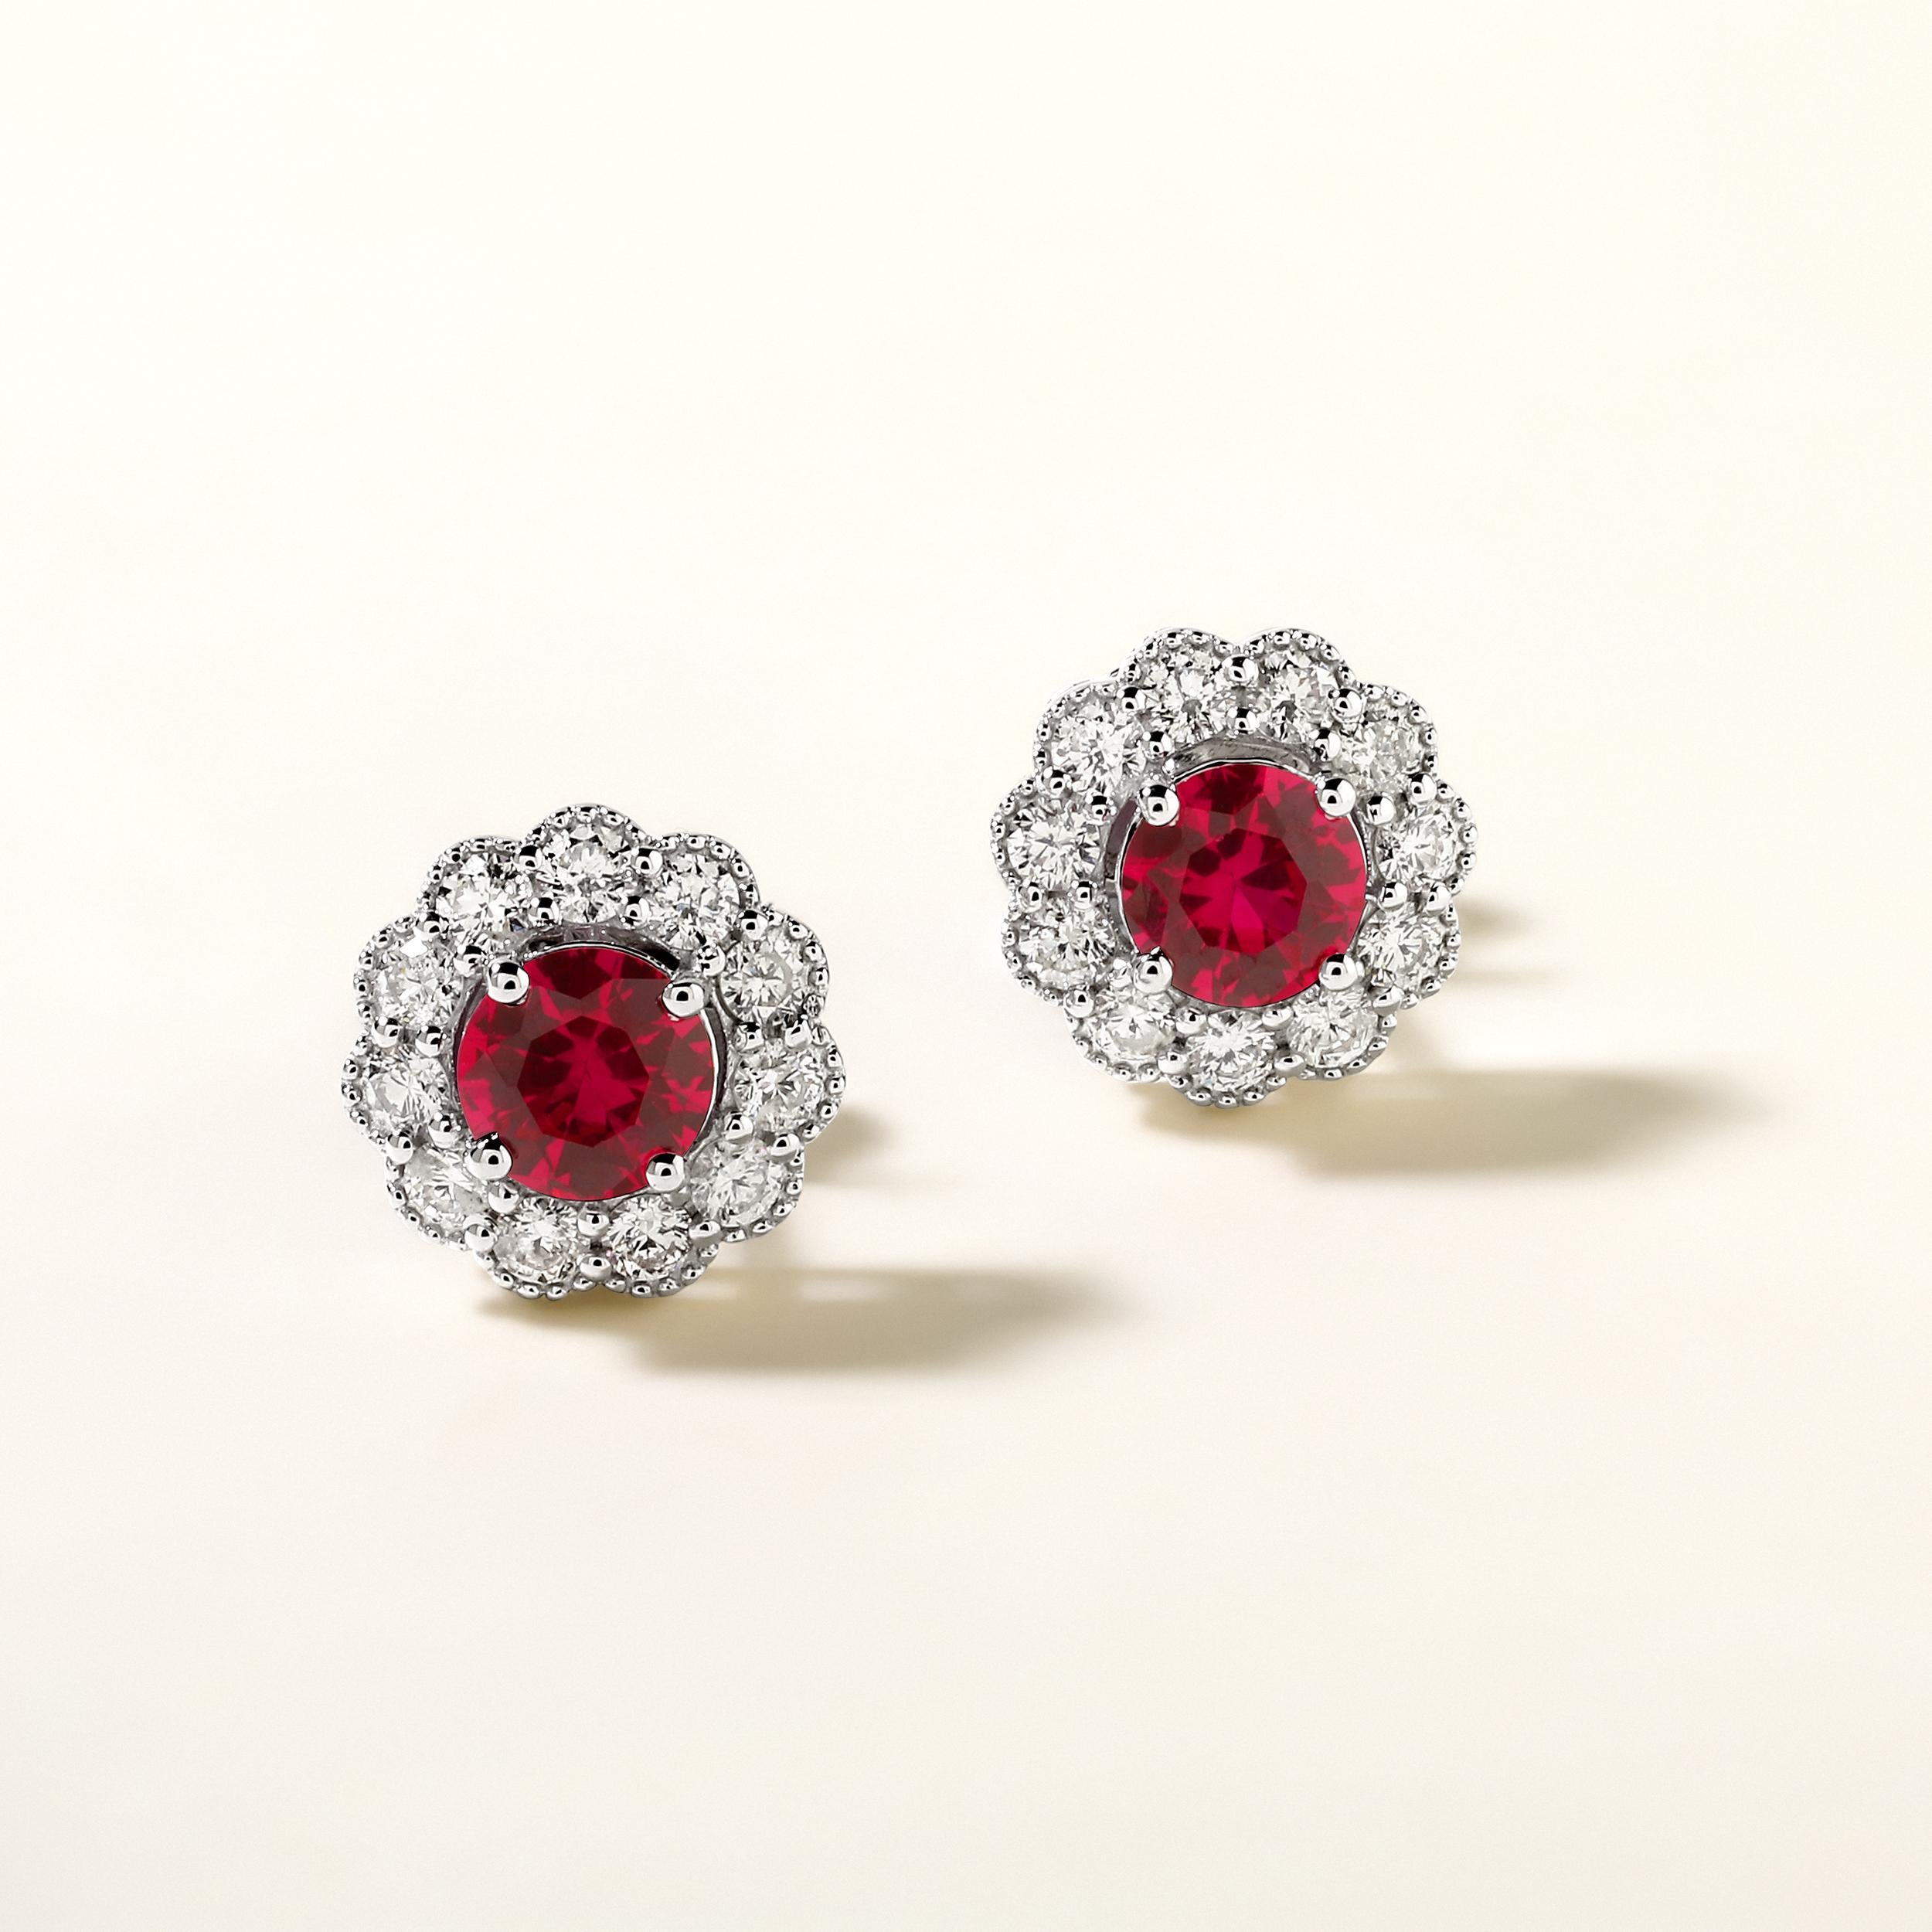 Crafted in 3.4 grams of 14K White Gold, the earrings contains 22 stones of Round Diamonds with a total of 0.62 carat in F-G color and I1-I2 clarity combined with 2 stones of Lab Created Ruby Gemstone with a total of 1.18 carat.

This jewelry piece